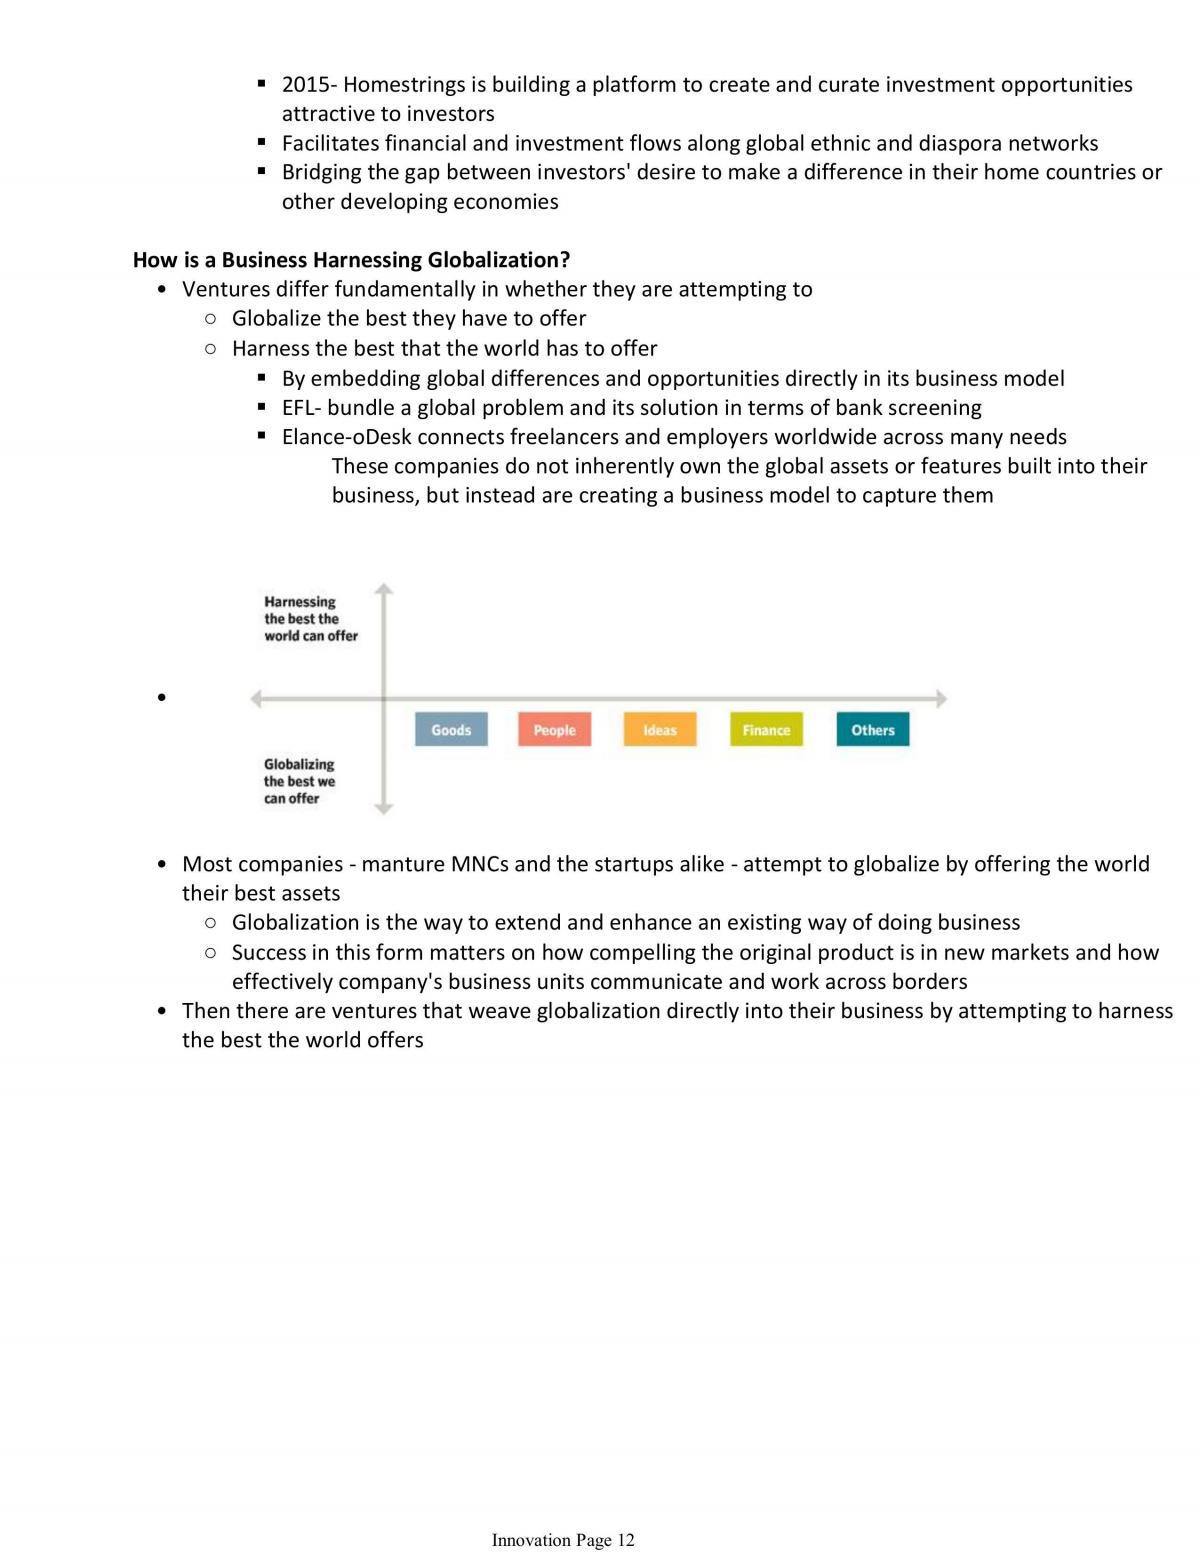 INFS2631 Innovation Part 2 for Semester - Page 12